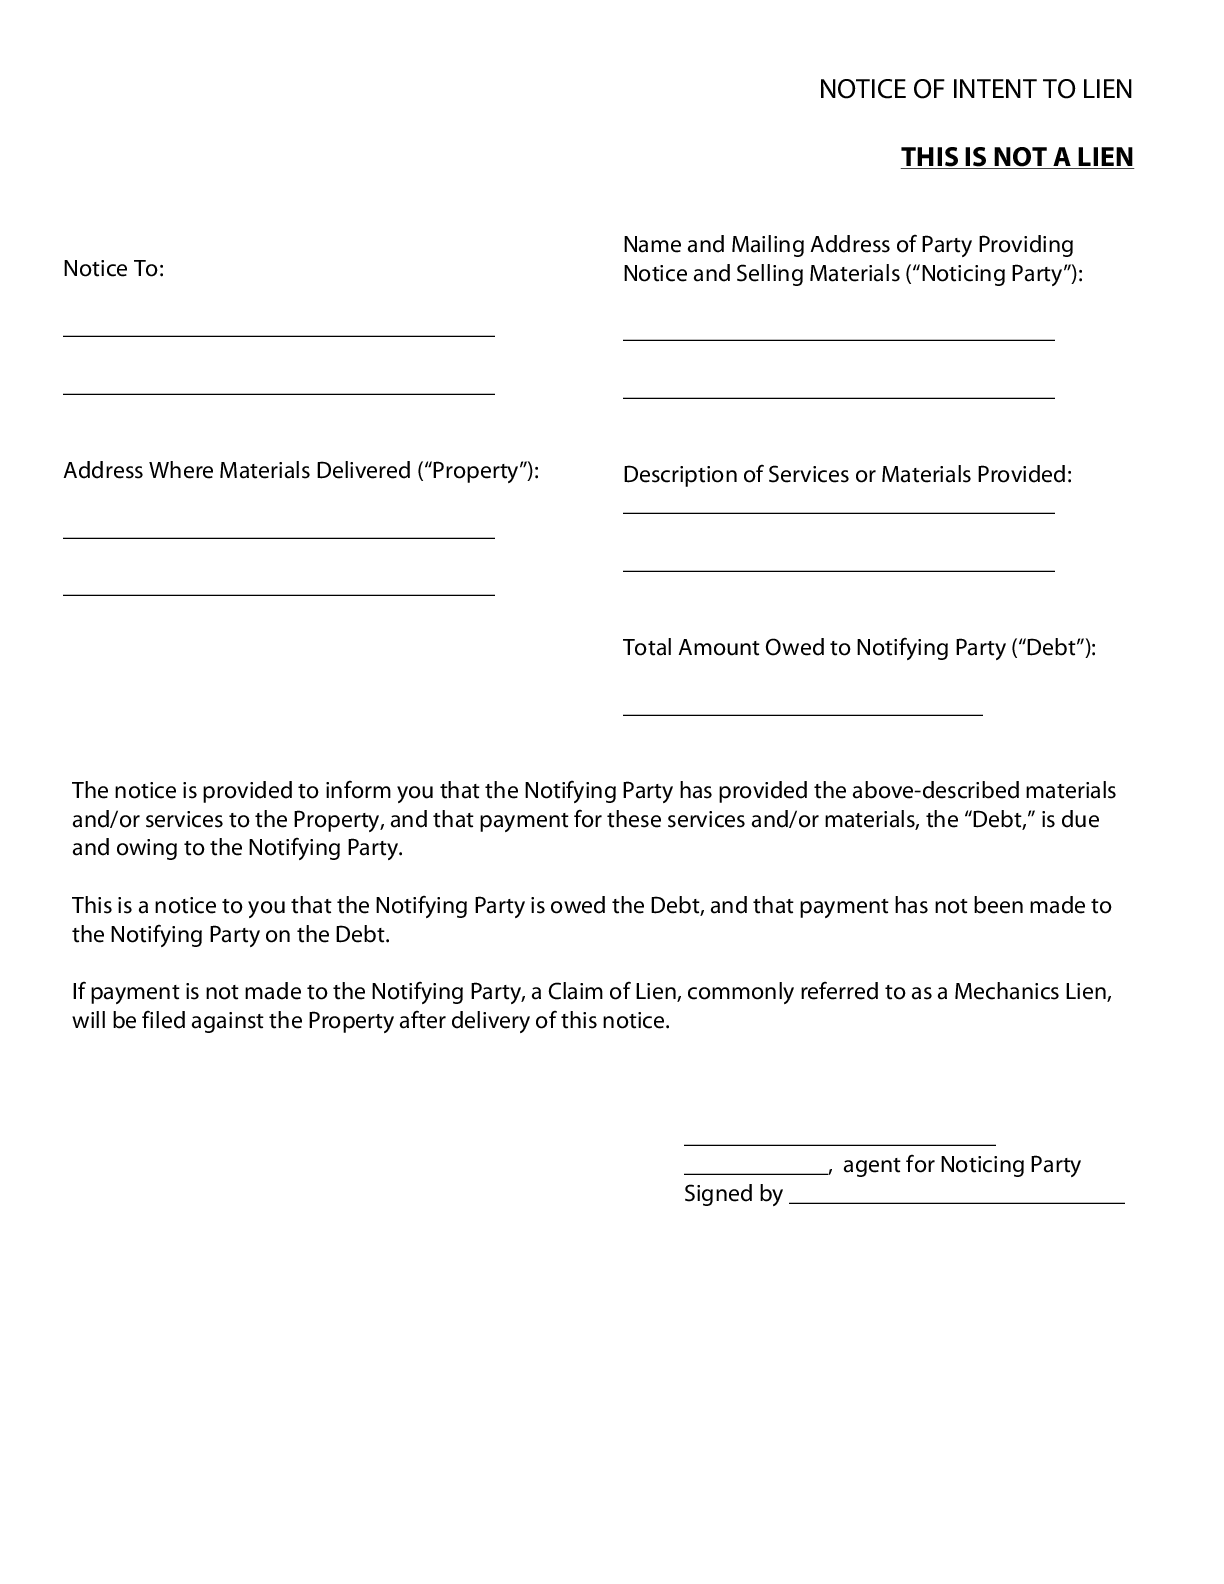 Texas Notice of Intent to Lien Form